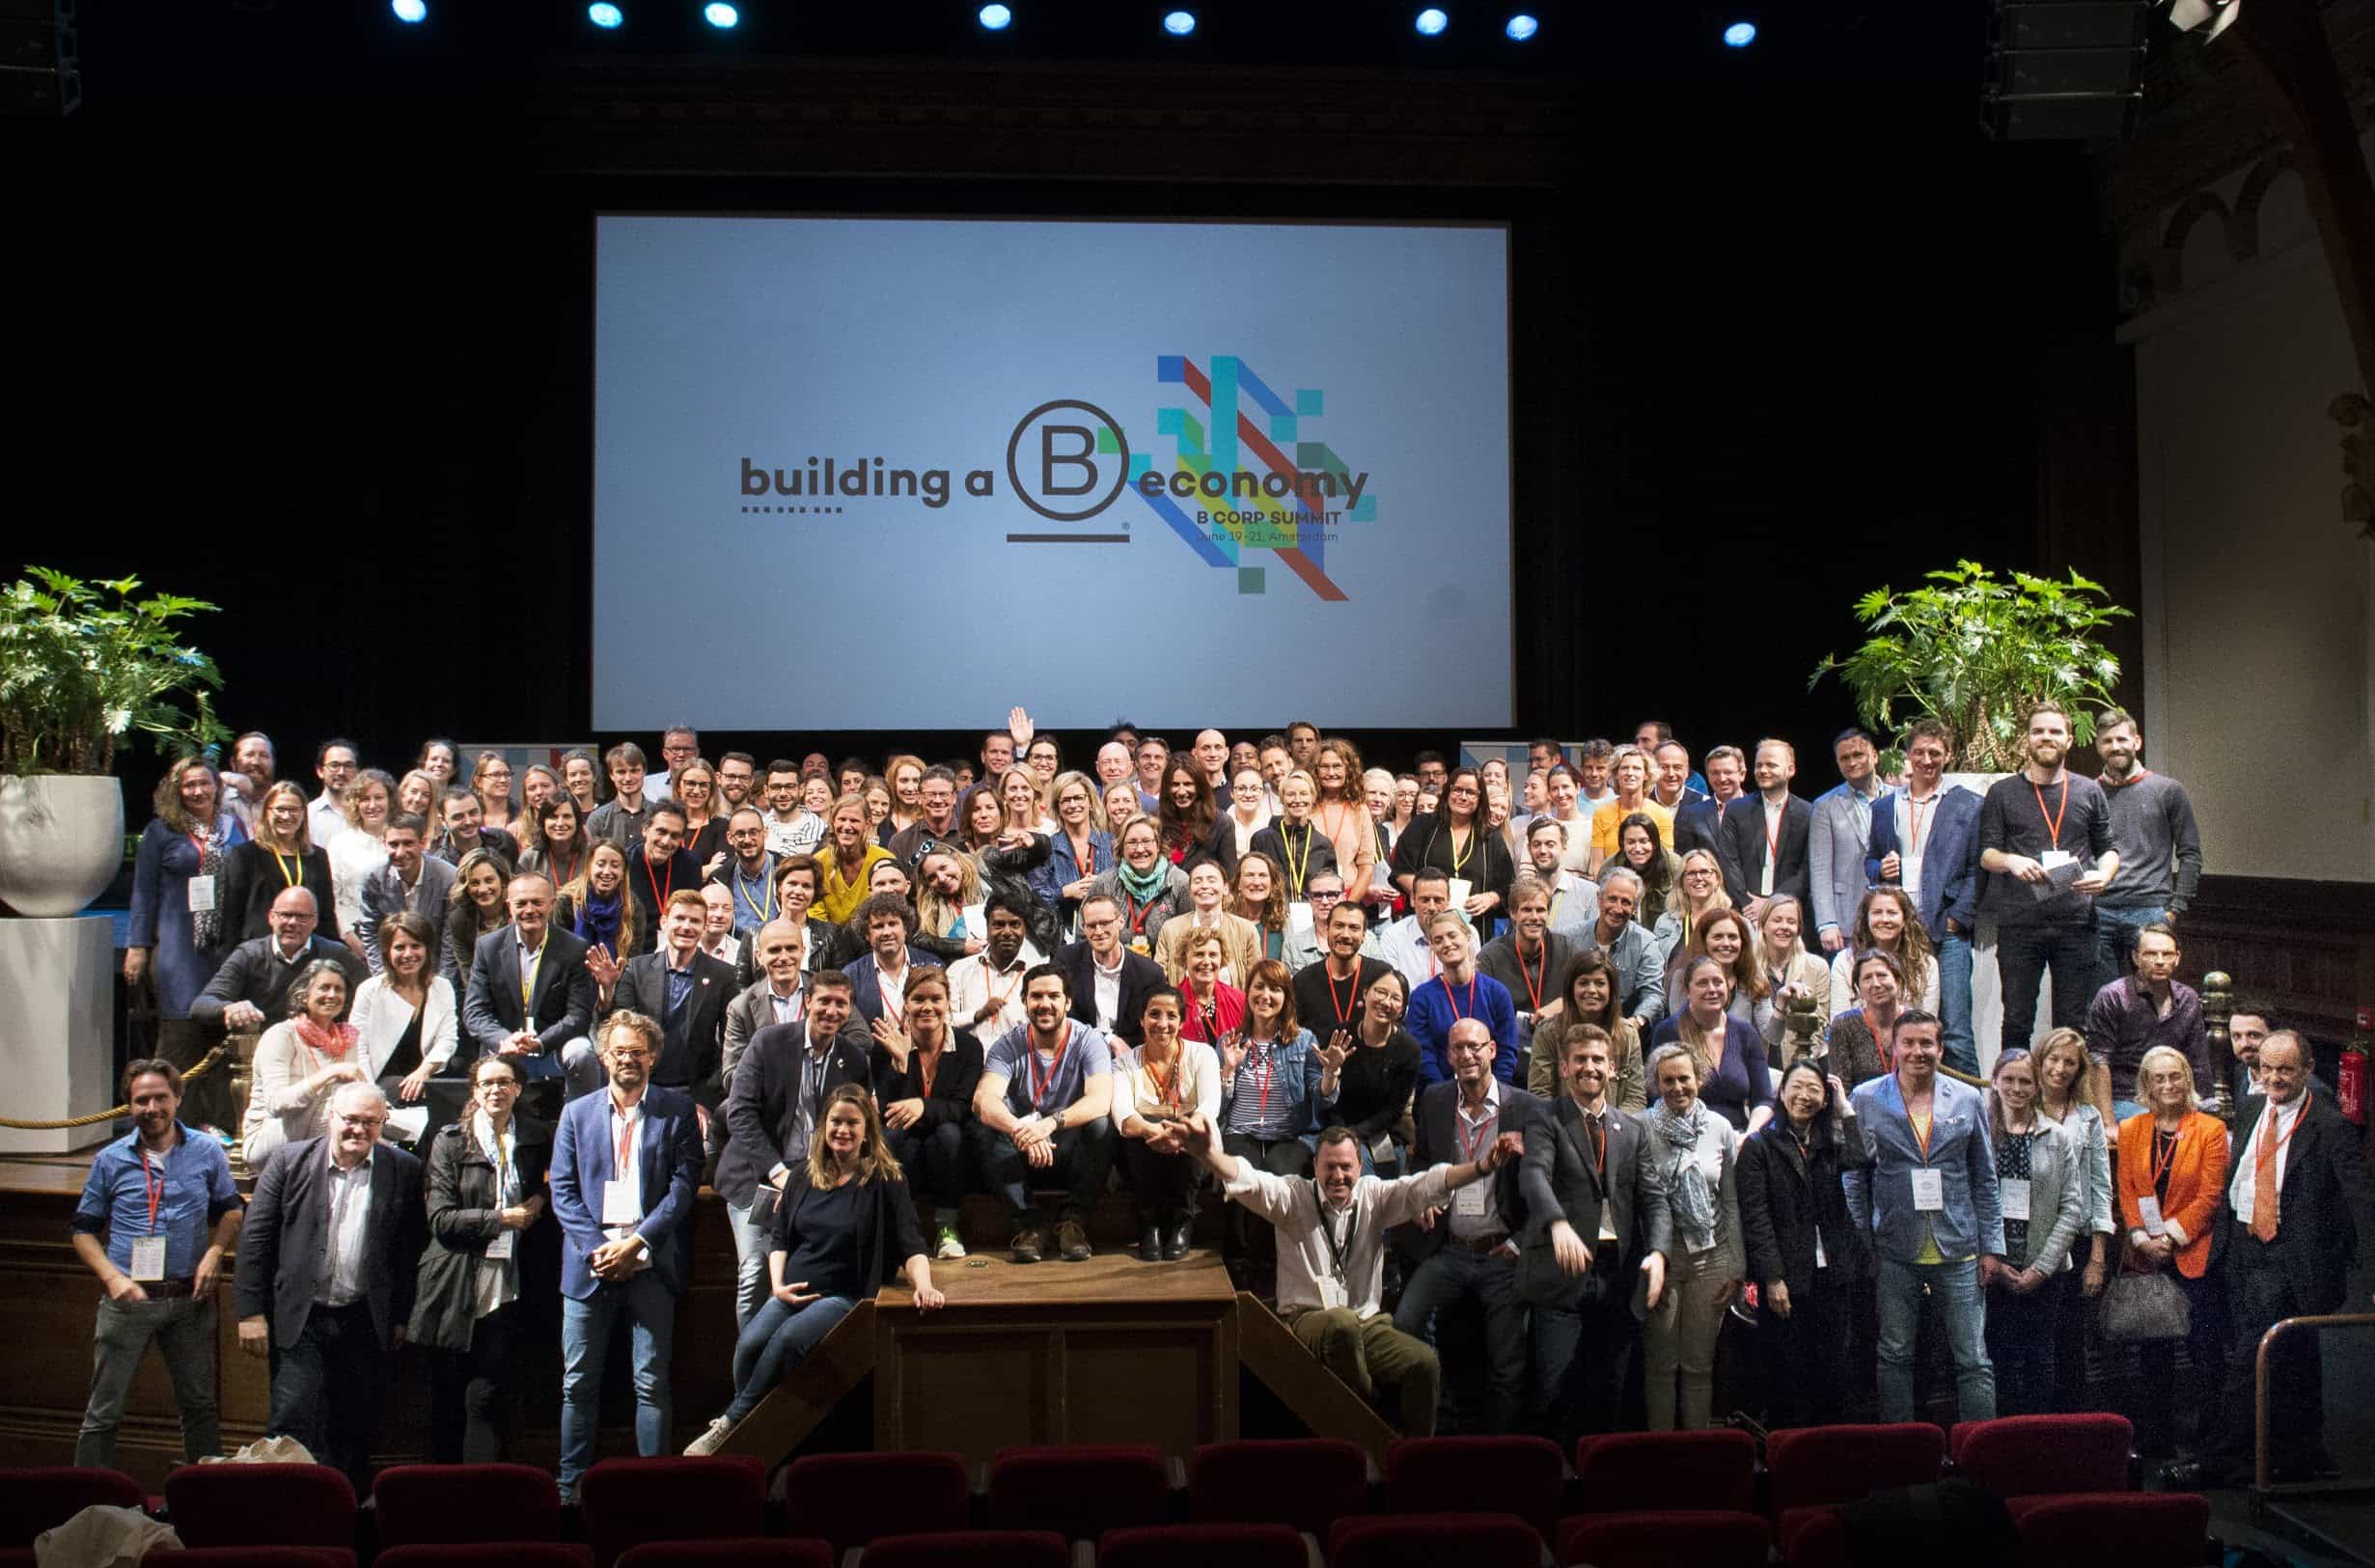 Group shot from the recent 2019 B Summit in Amsterdam